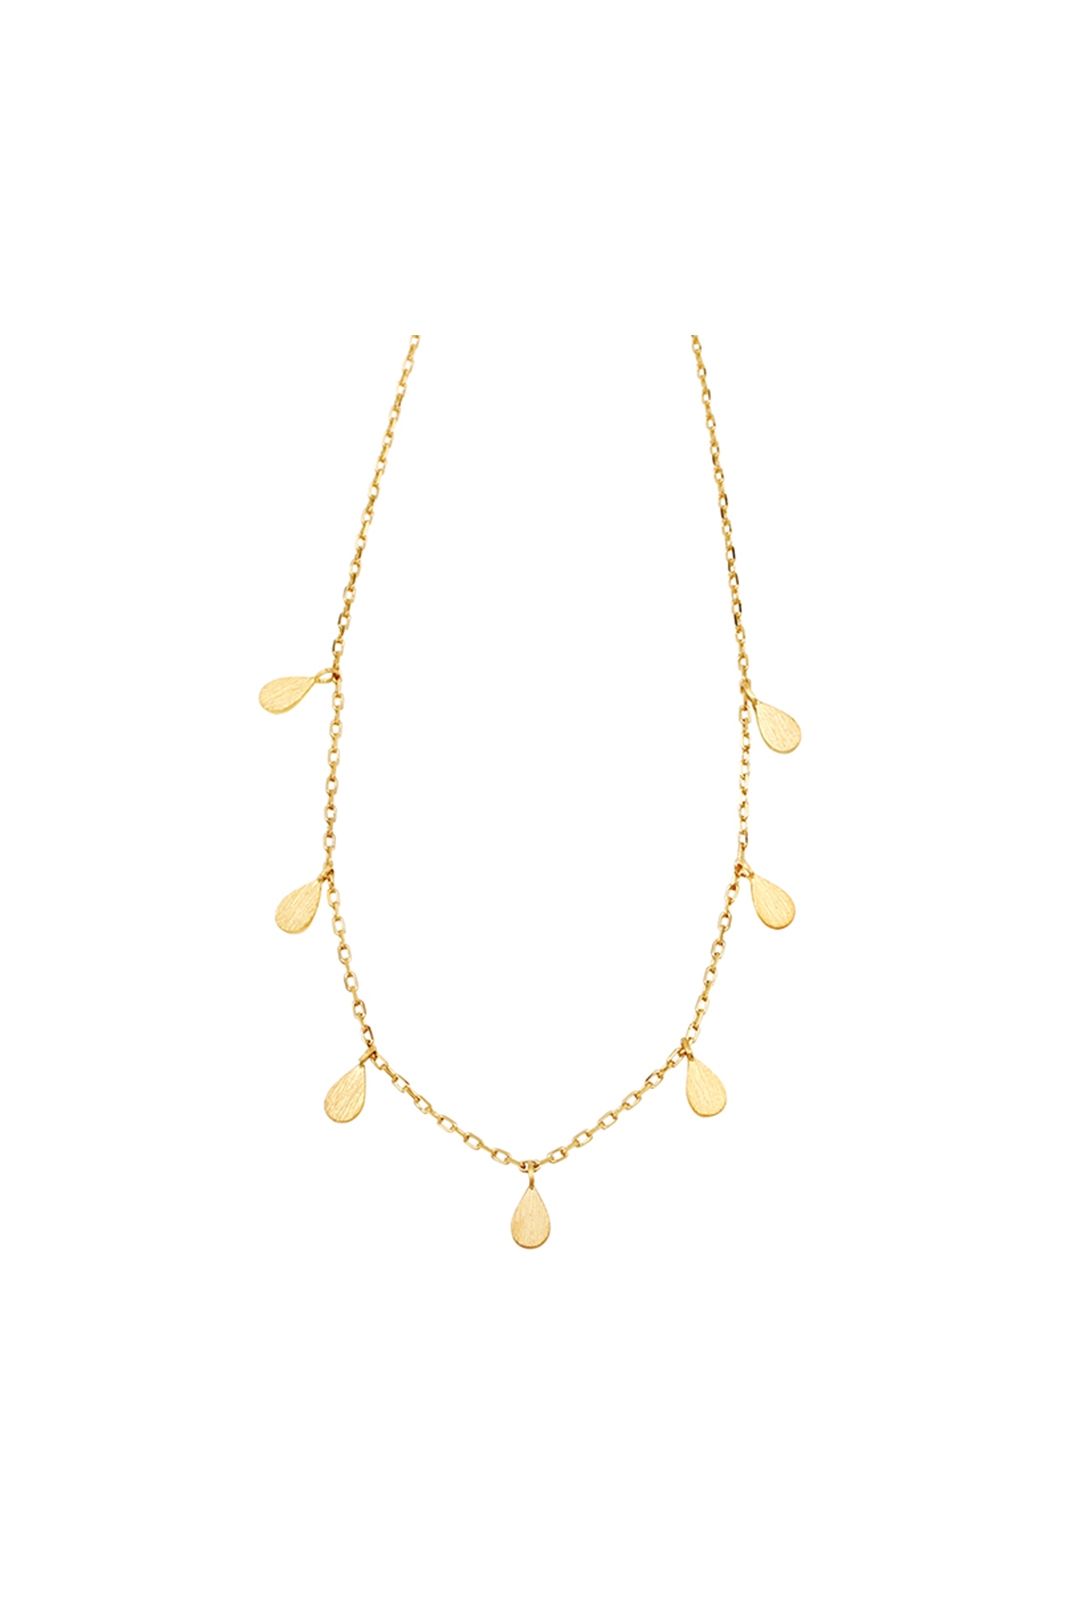 Jolie and Deen - Teardrop Necklace - Gold - Ghost Front